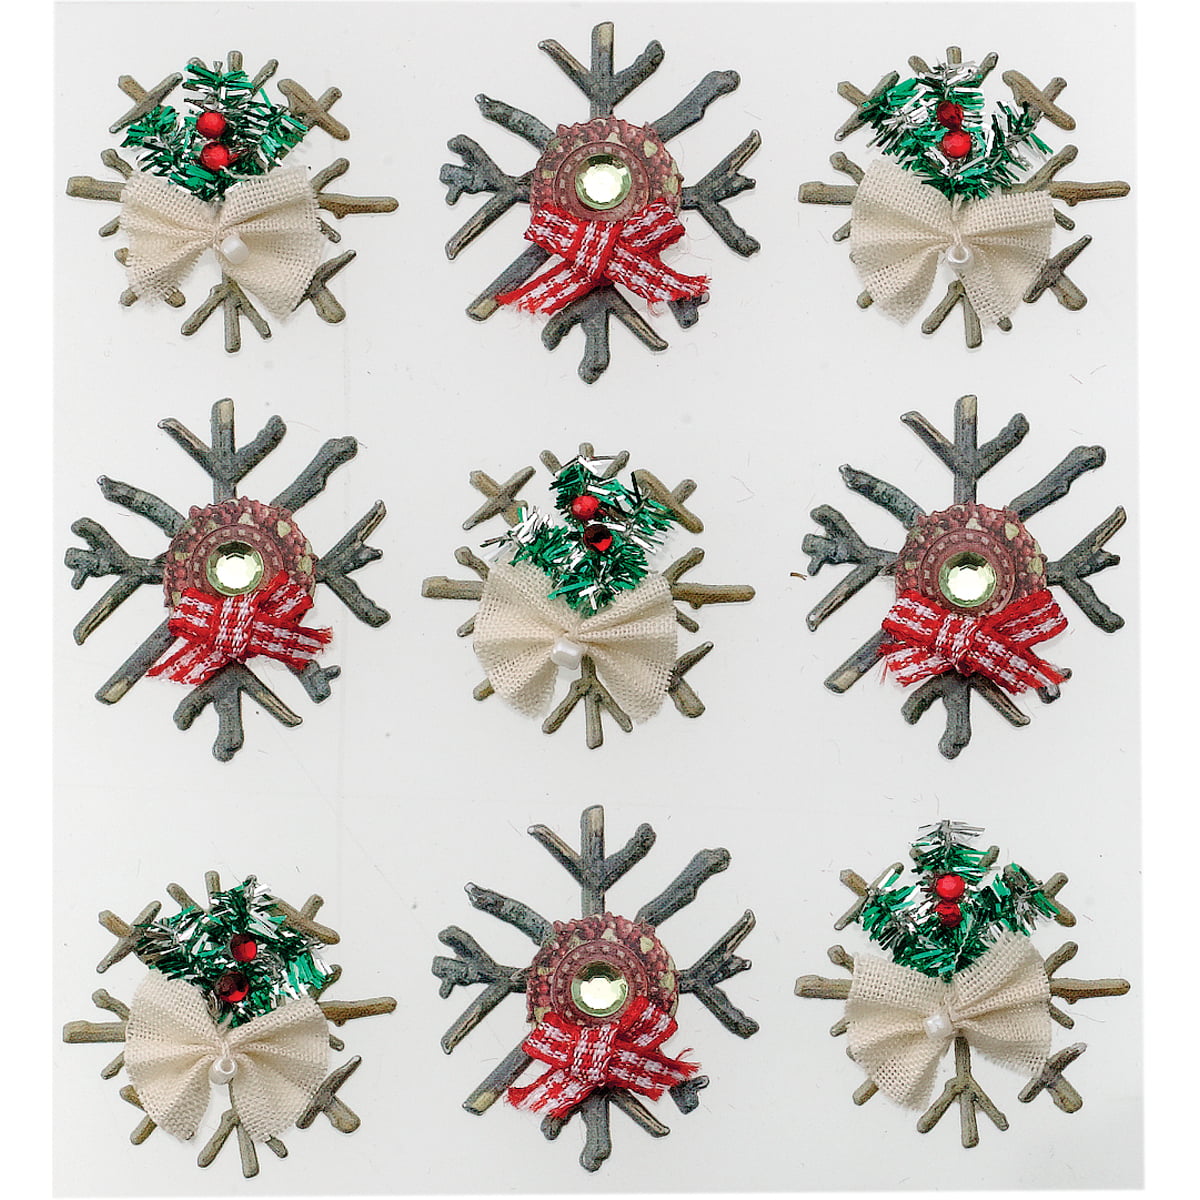 JOLEE'S BOUTIQUE STICKERS WOODEN SNOWFLAKES Christmas 